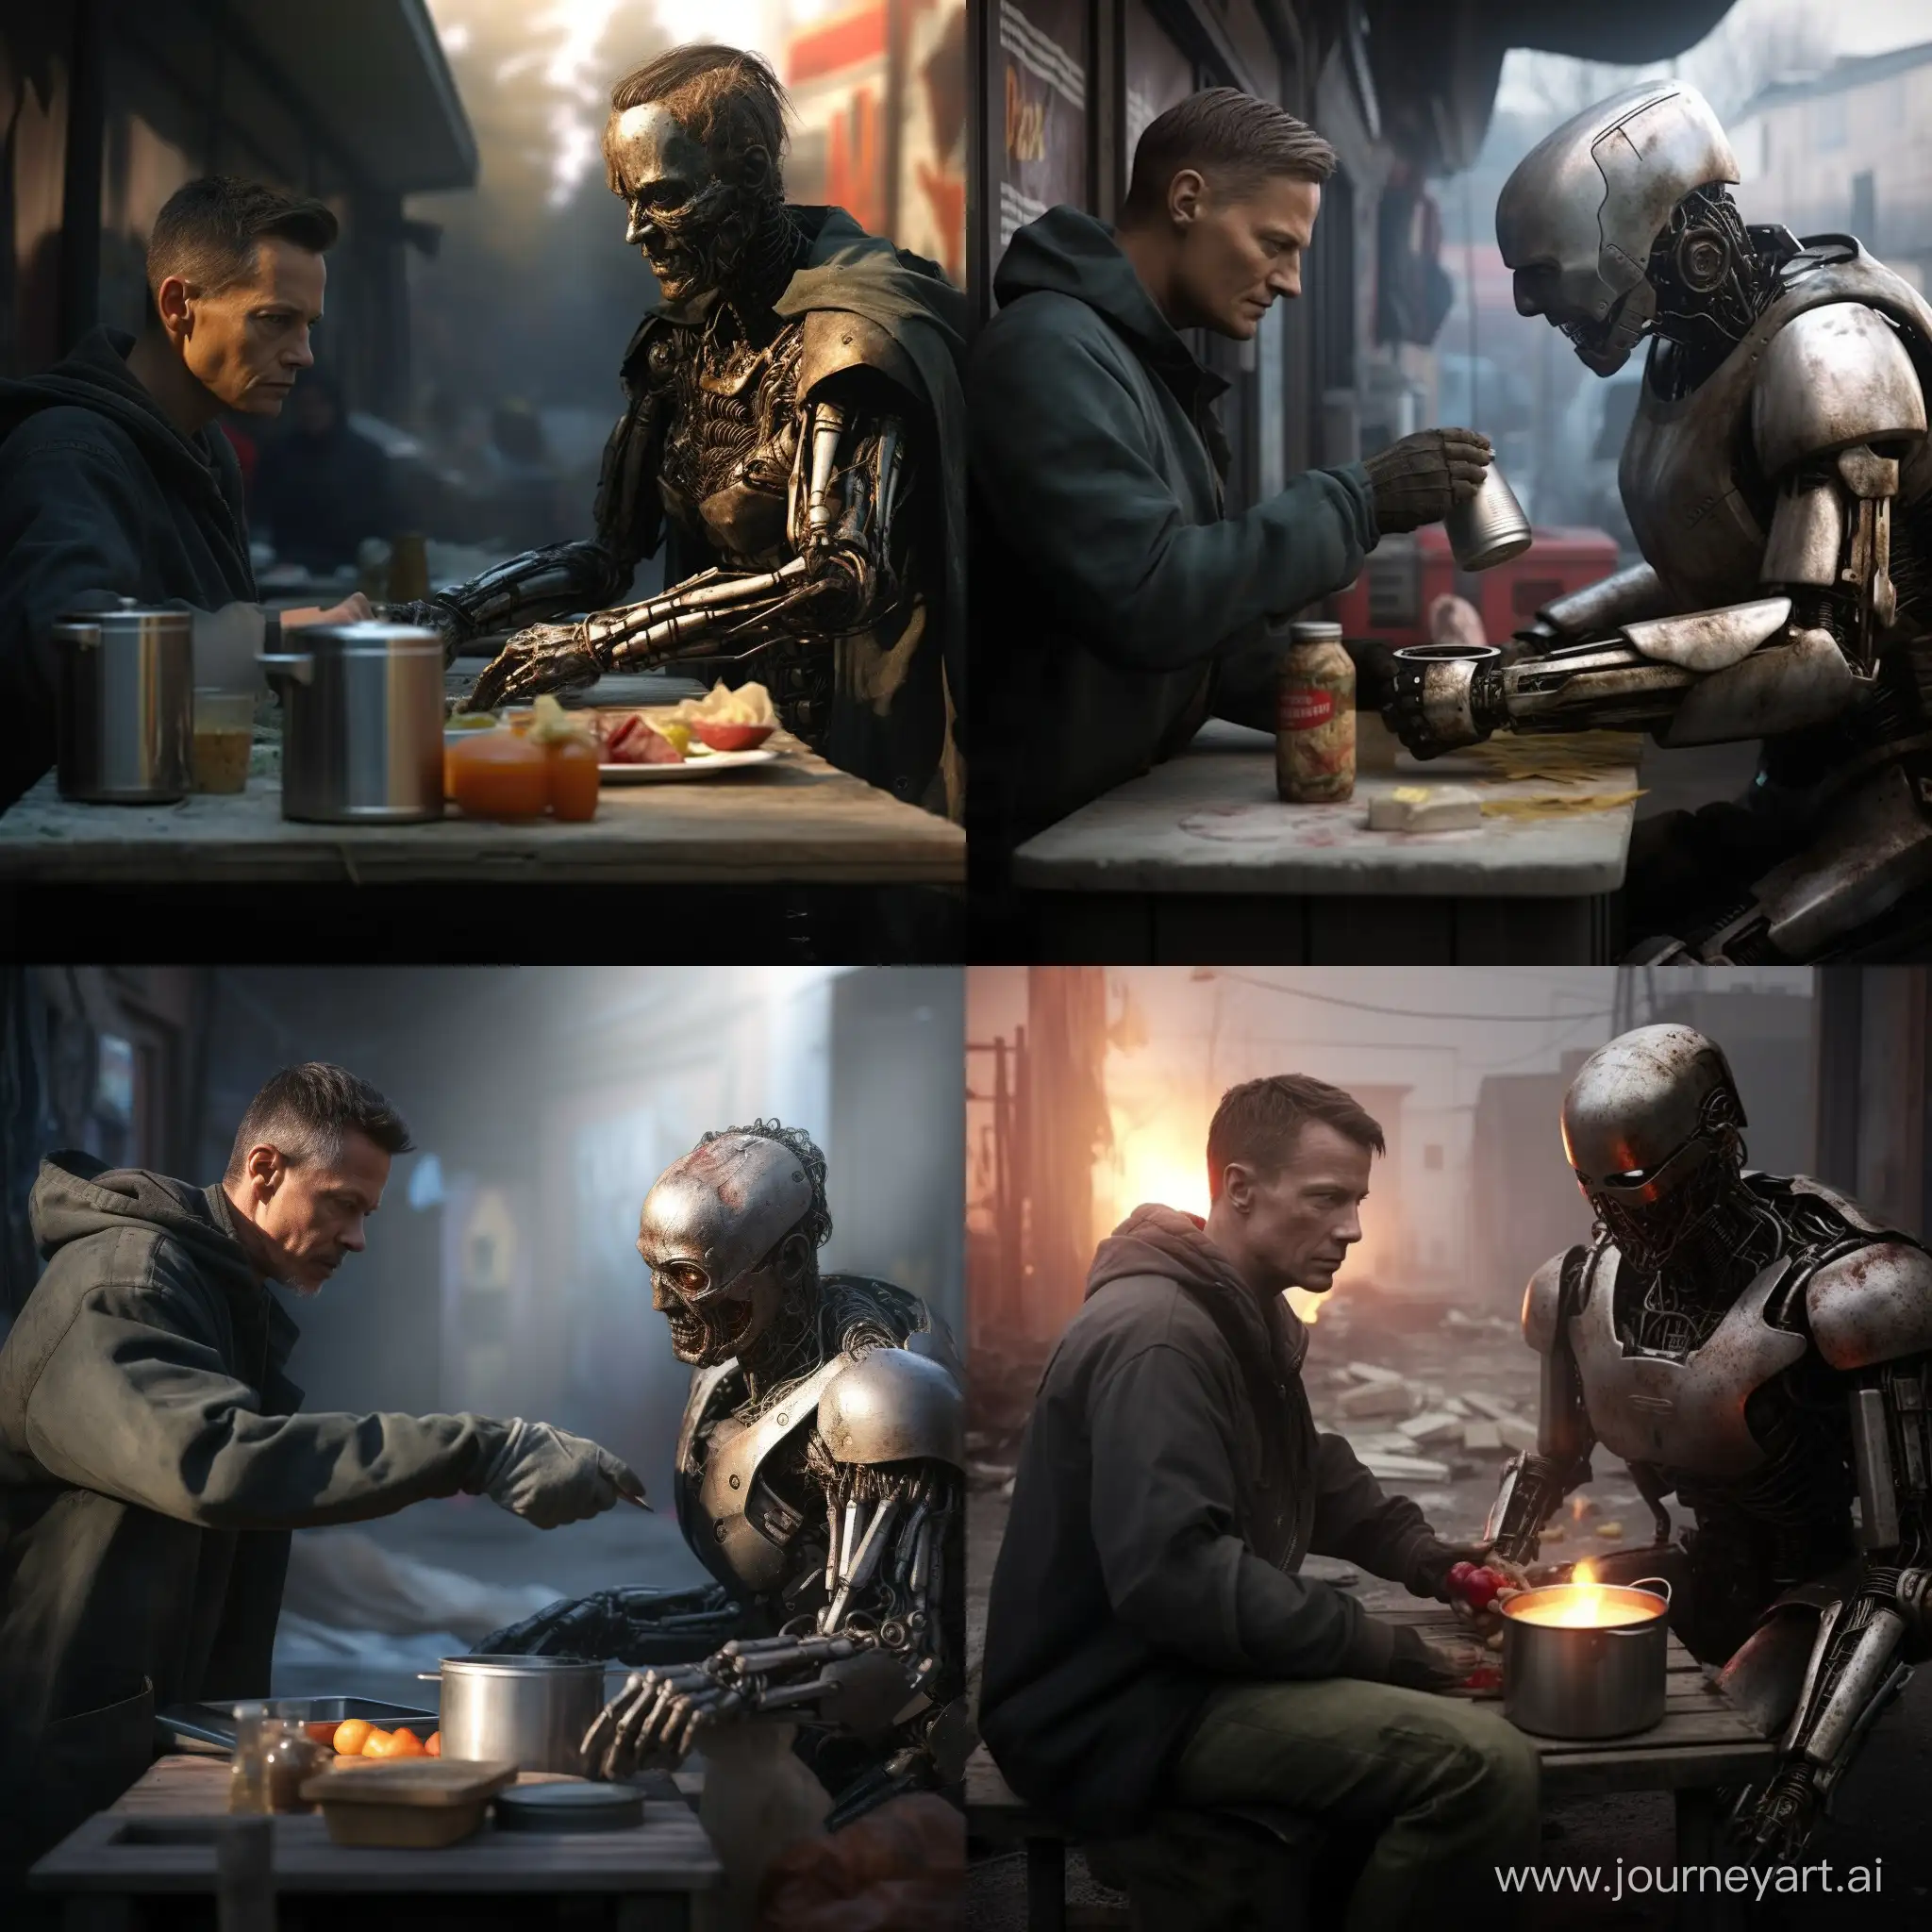 Terminator-Serving-Soup-to-Homeless-in-Stunning-Photorealistic-High-Resolution